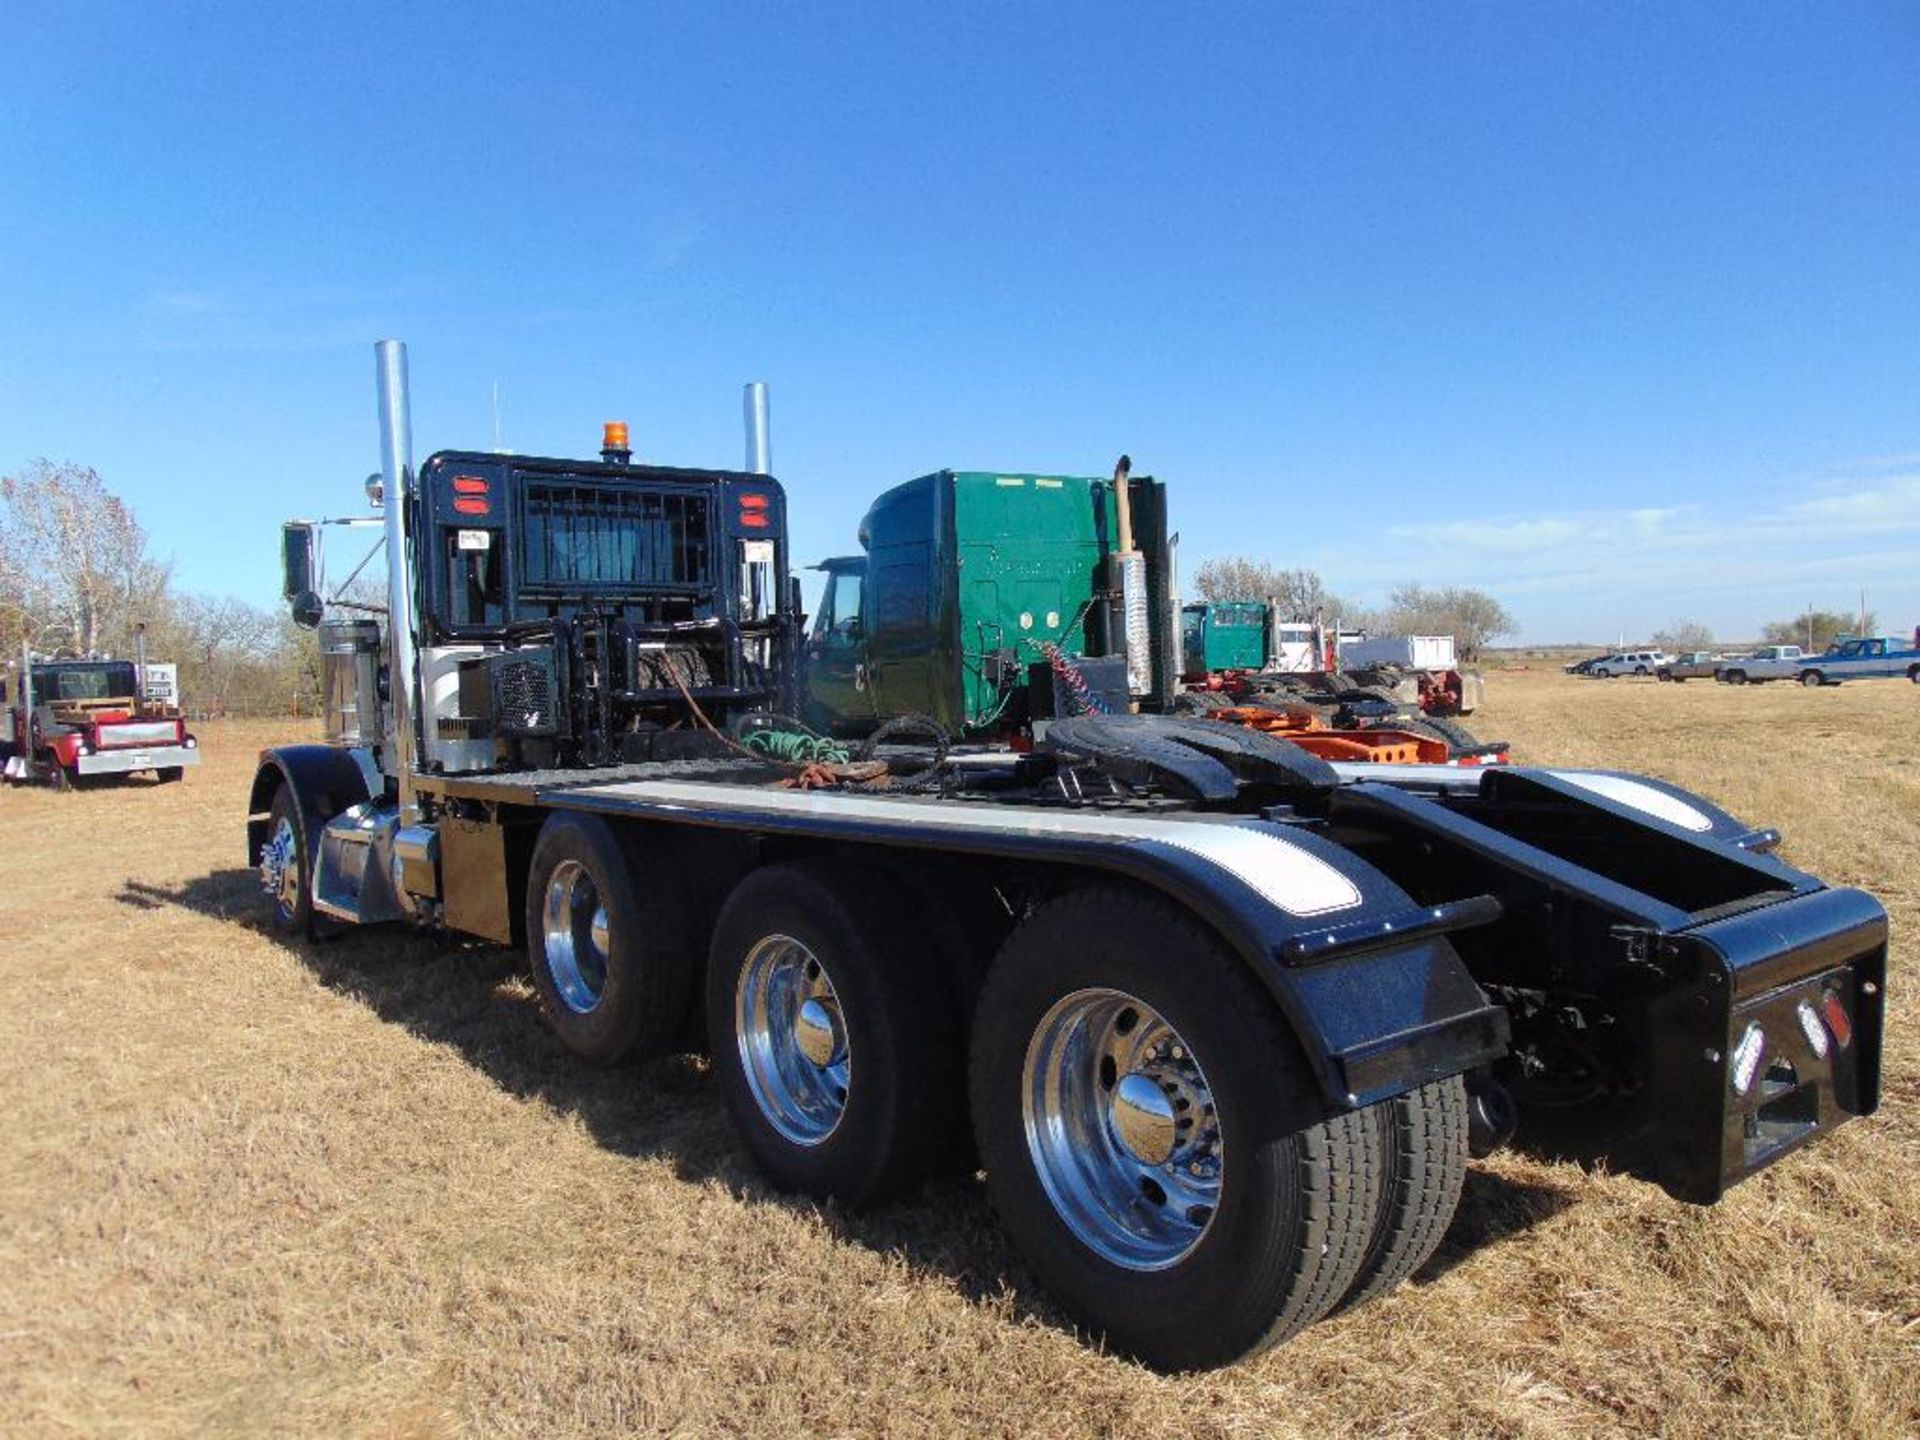 1998 Peterbilt 378 Tri Axle Winch Tractor, s/n 1xpfpbex2wn444045 new crate 3406e eng, 18 spd trans, - Image 5 of 14